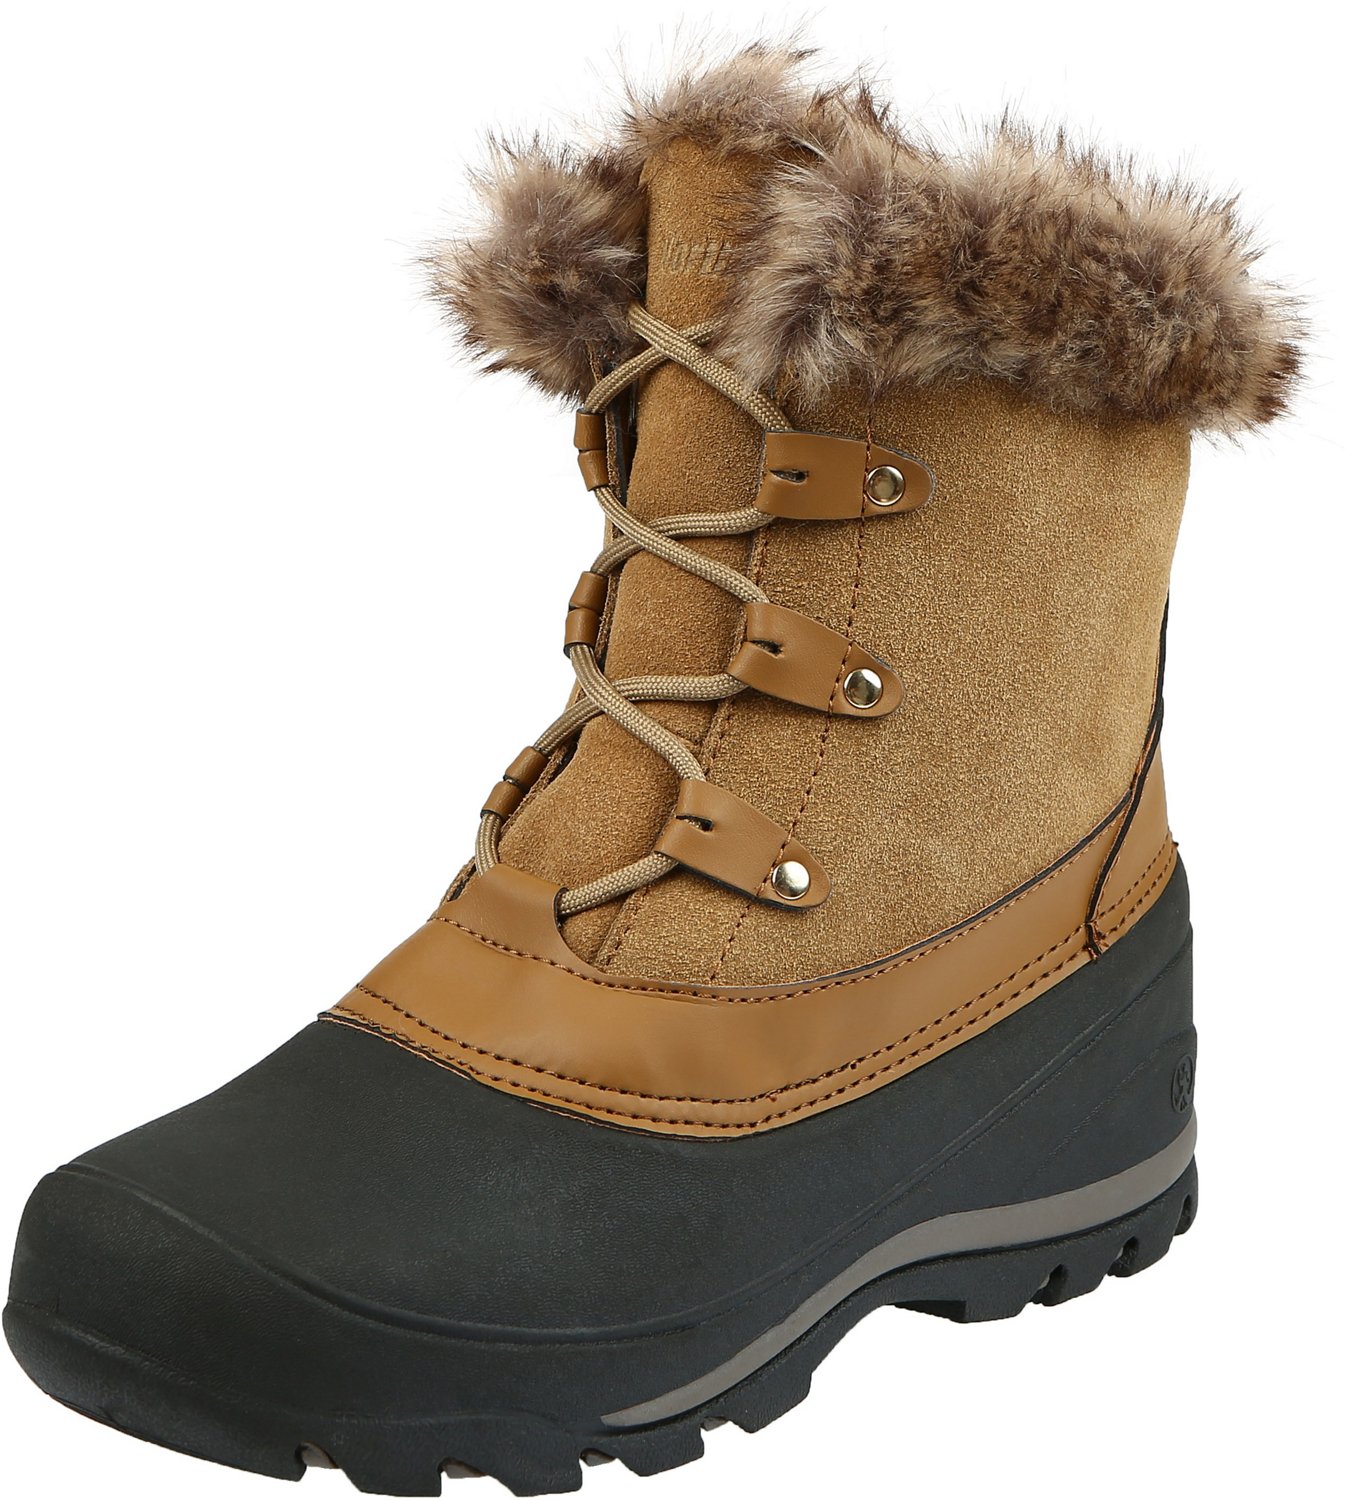 Northside Women’s Fairfield Cold Weather Boots | Academy